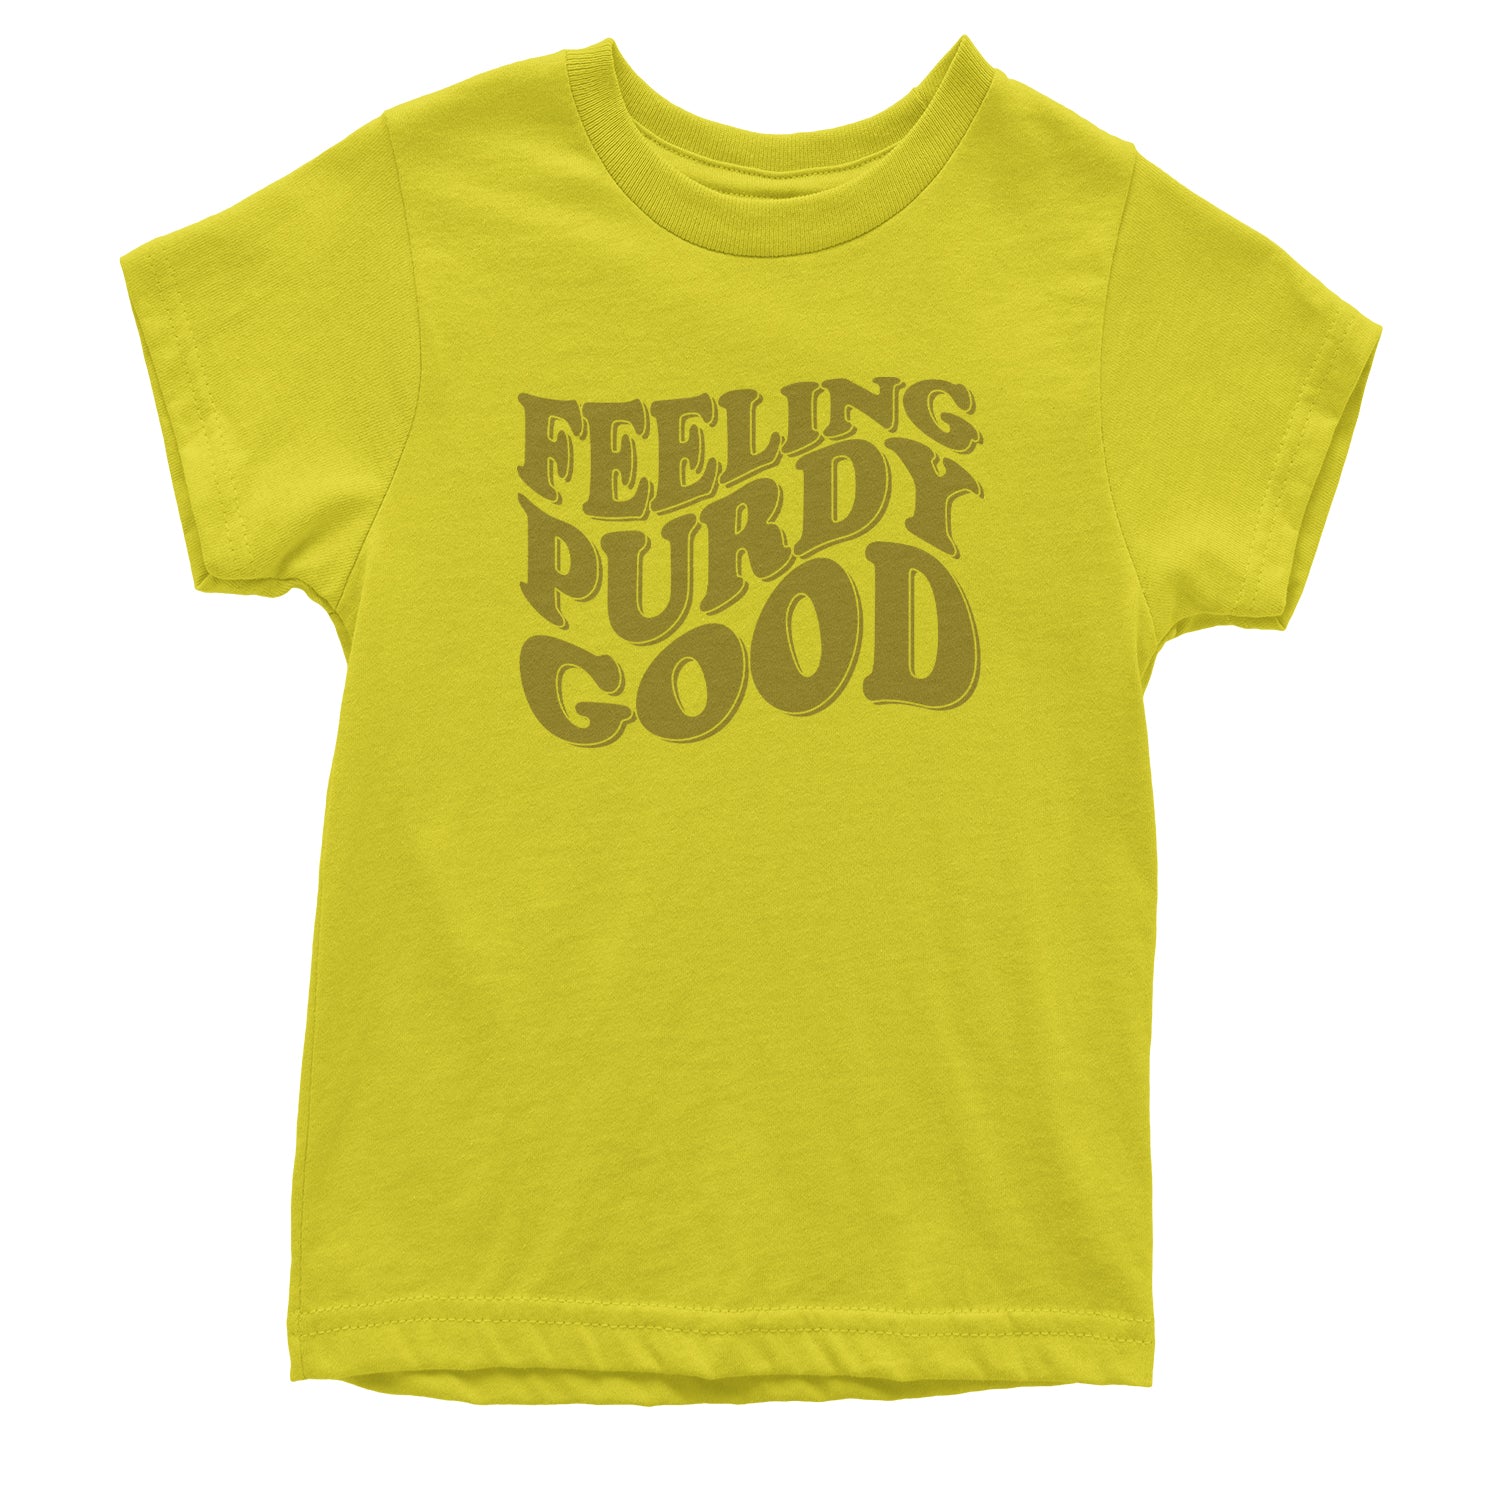 Feeling Purdy Good Youth T-shirt 13, football by Expression Tees